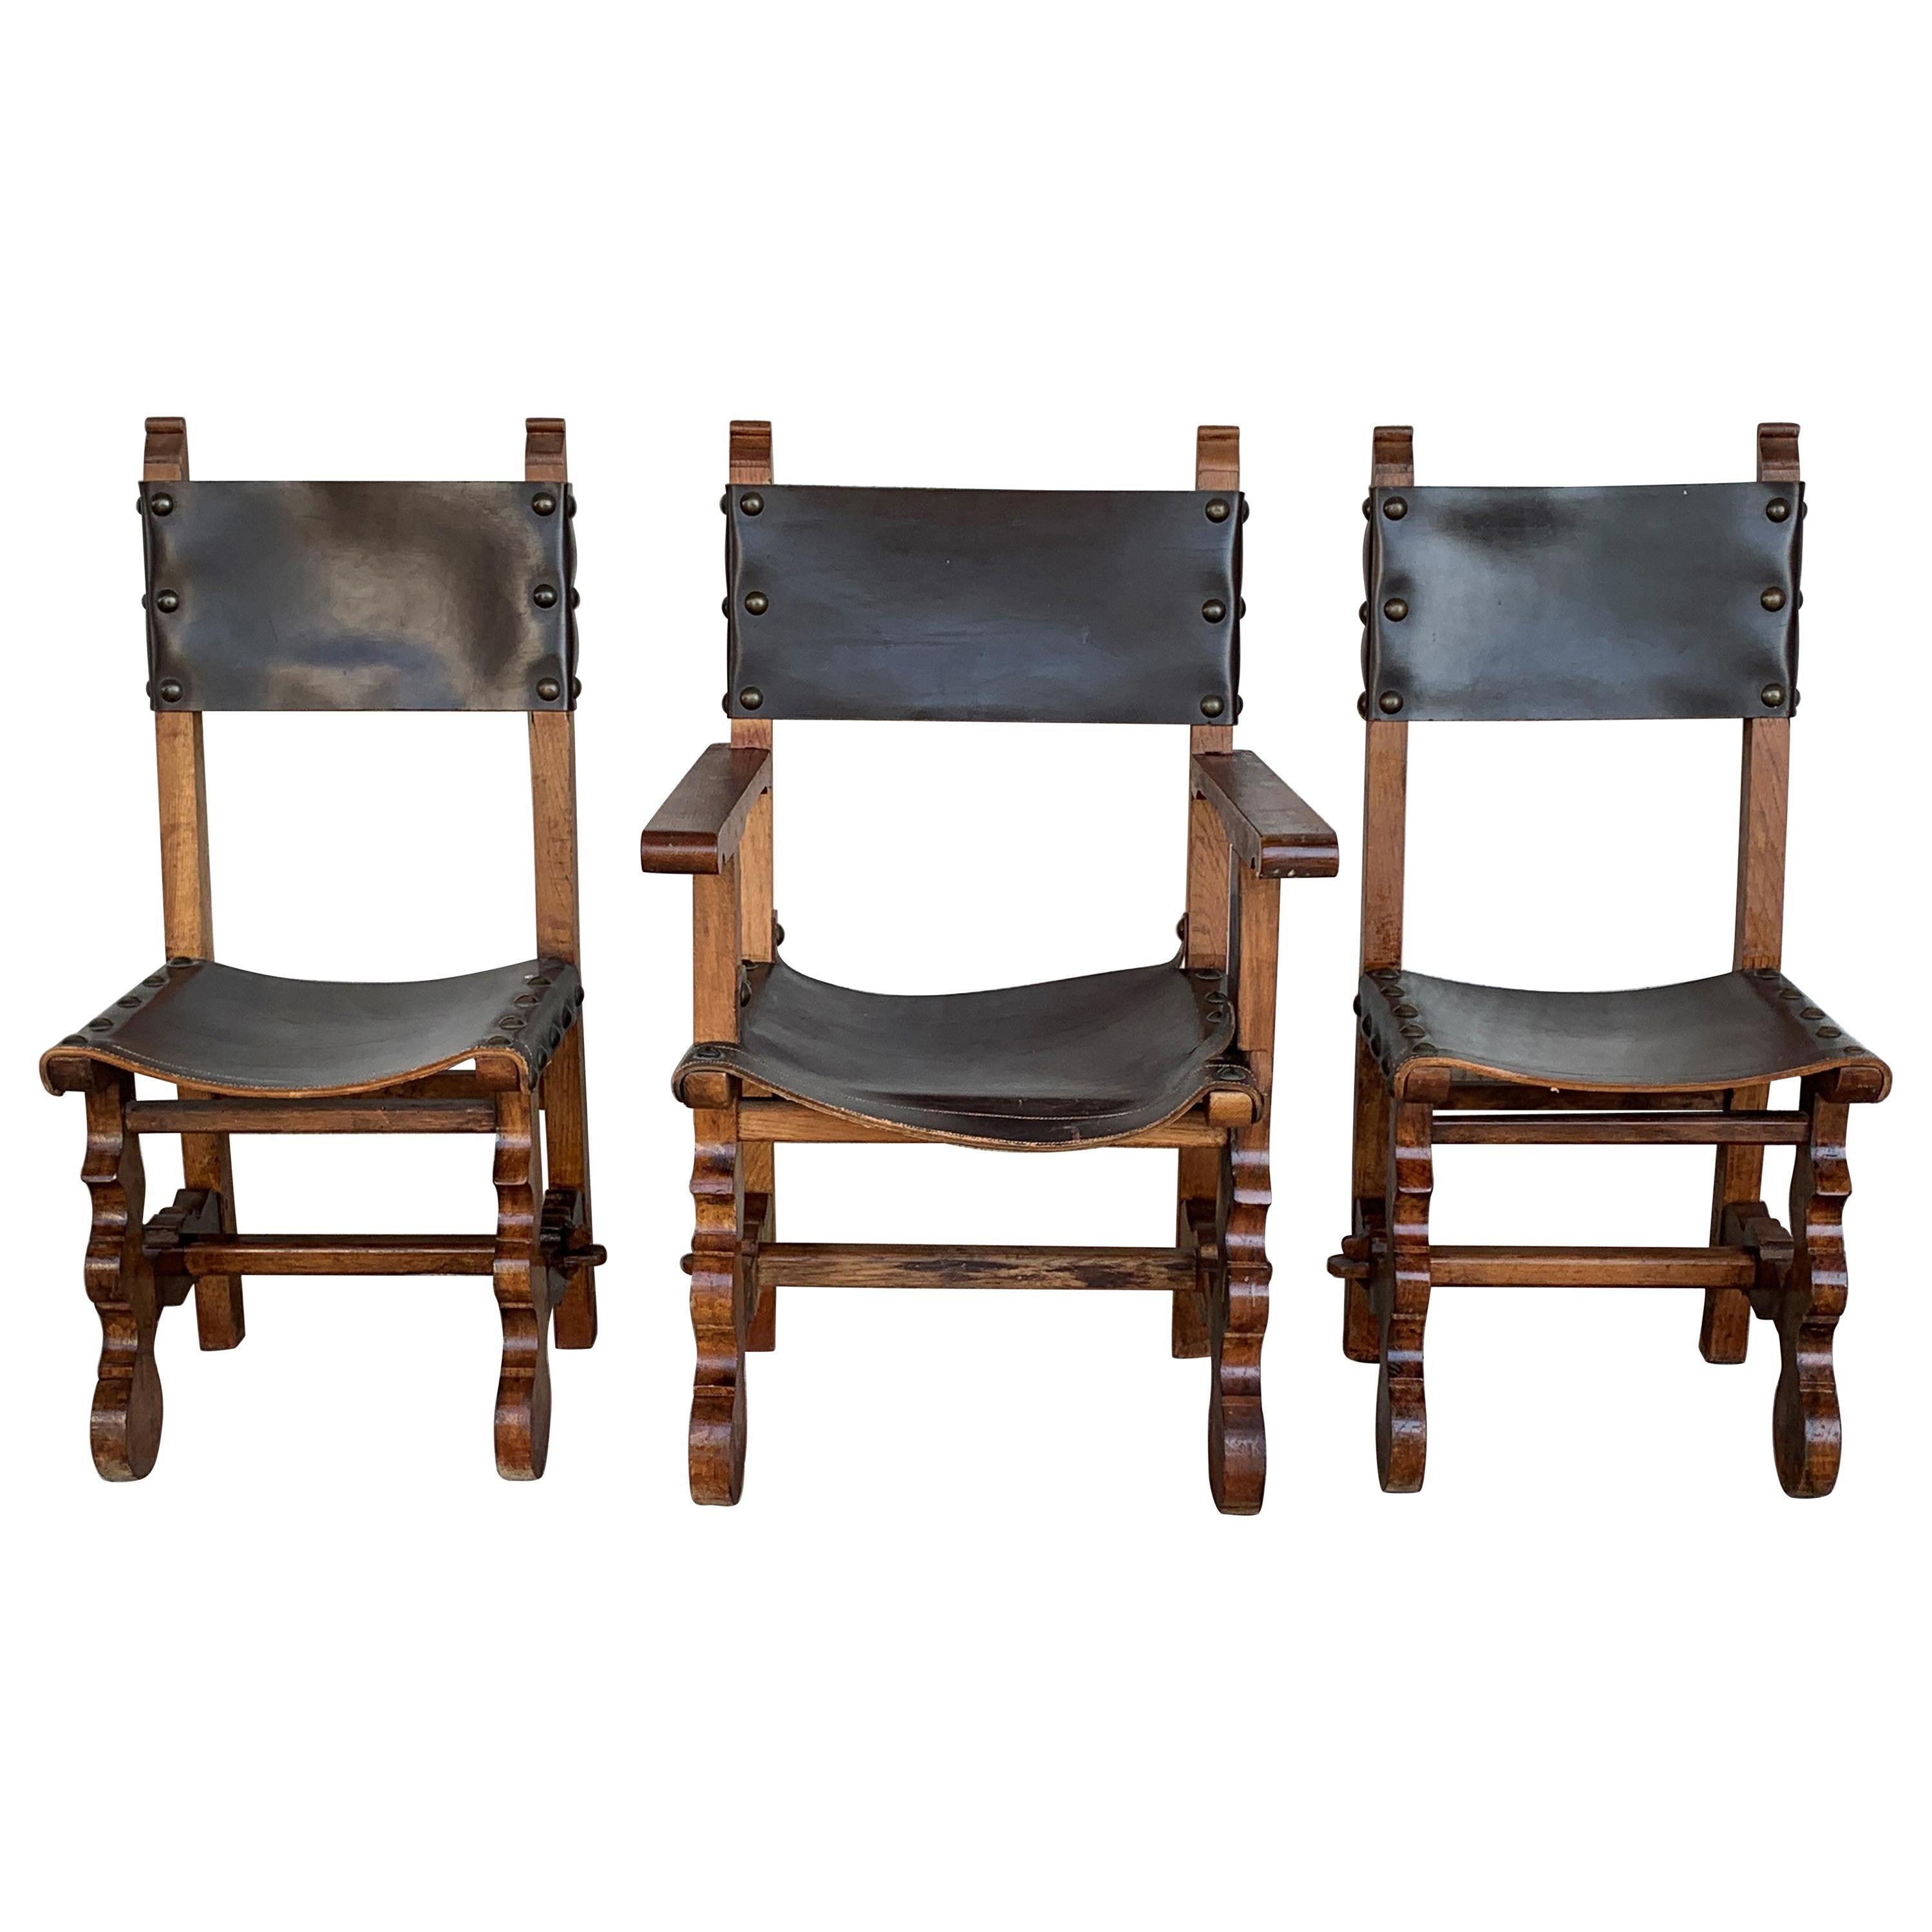 19th Century Set of Spanish Colonial Armchair and Two Chairs